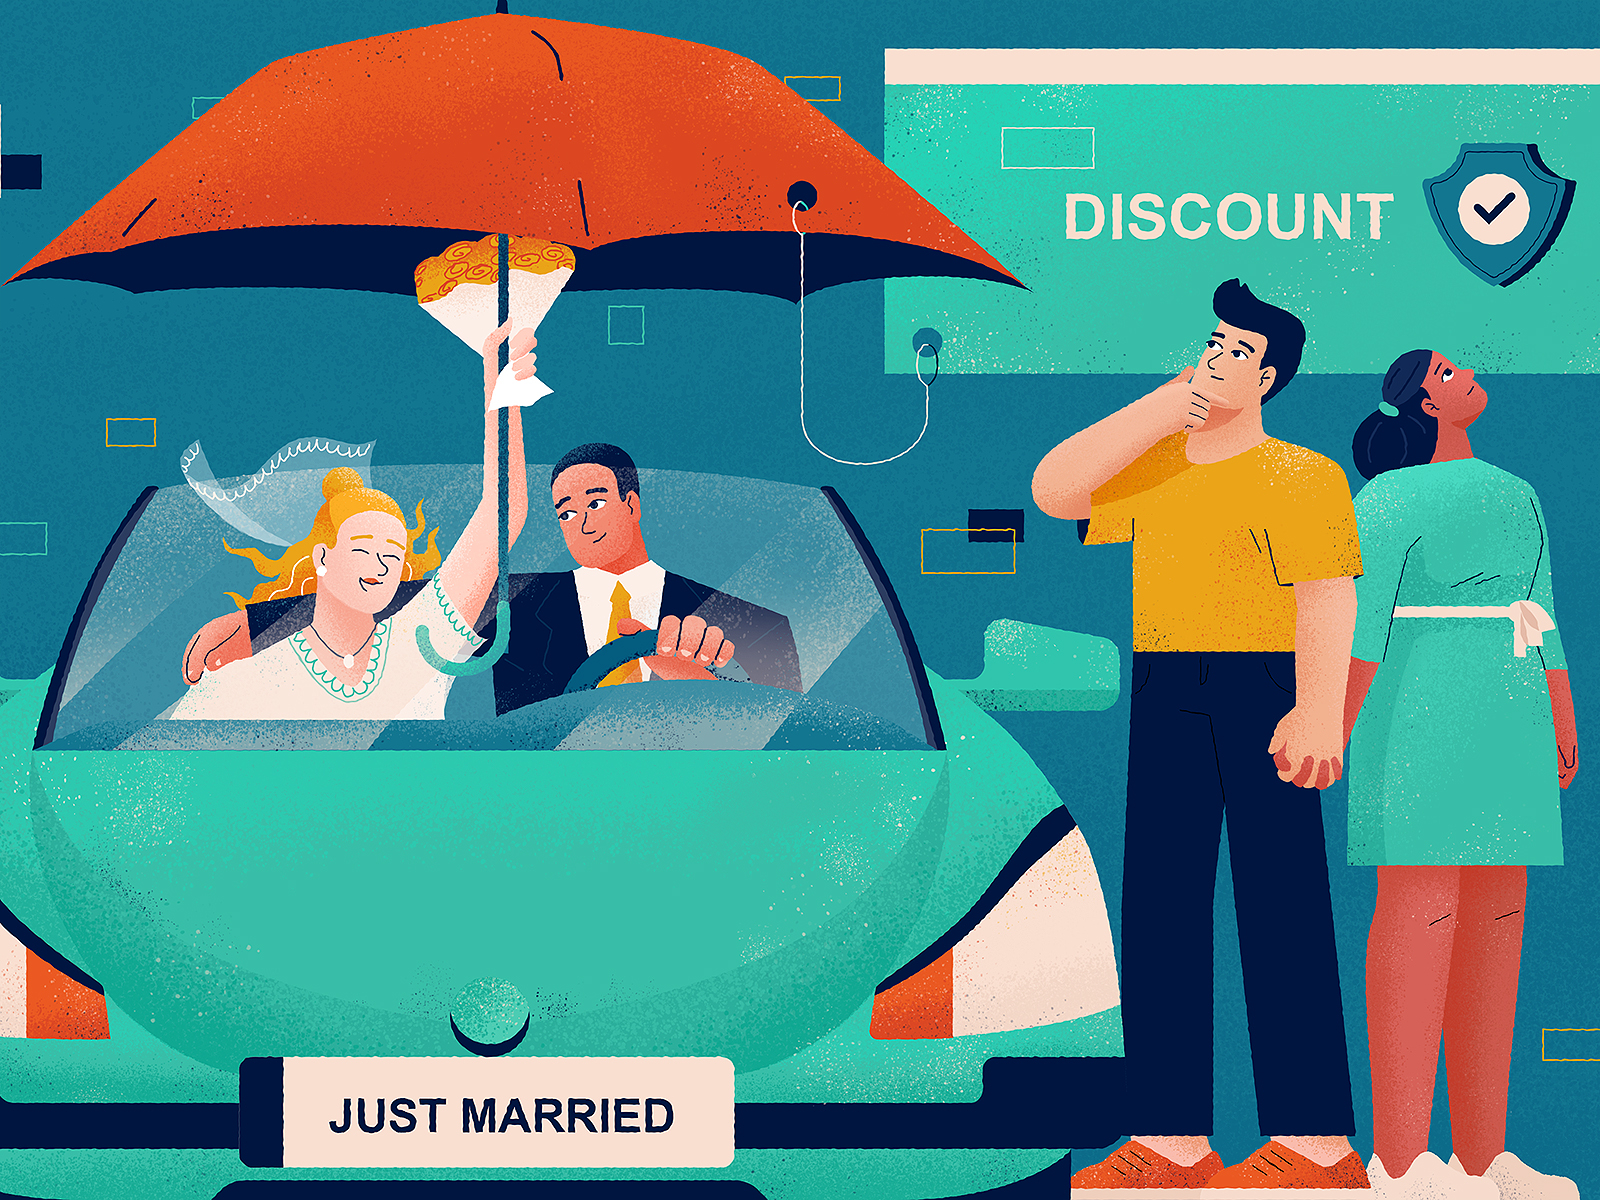 Married Couples' Insurance Rates design man woman flat illustration character vector relationship couple blue insurance auto car just married married discount